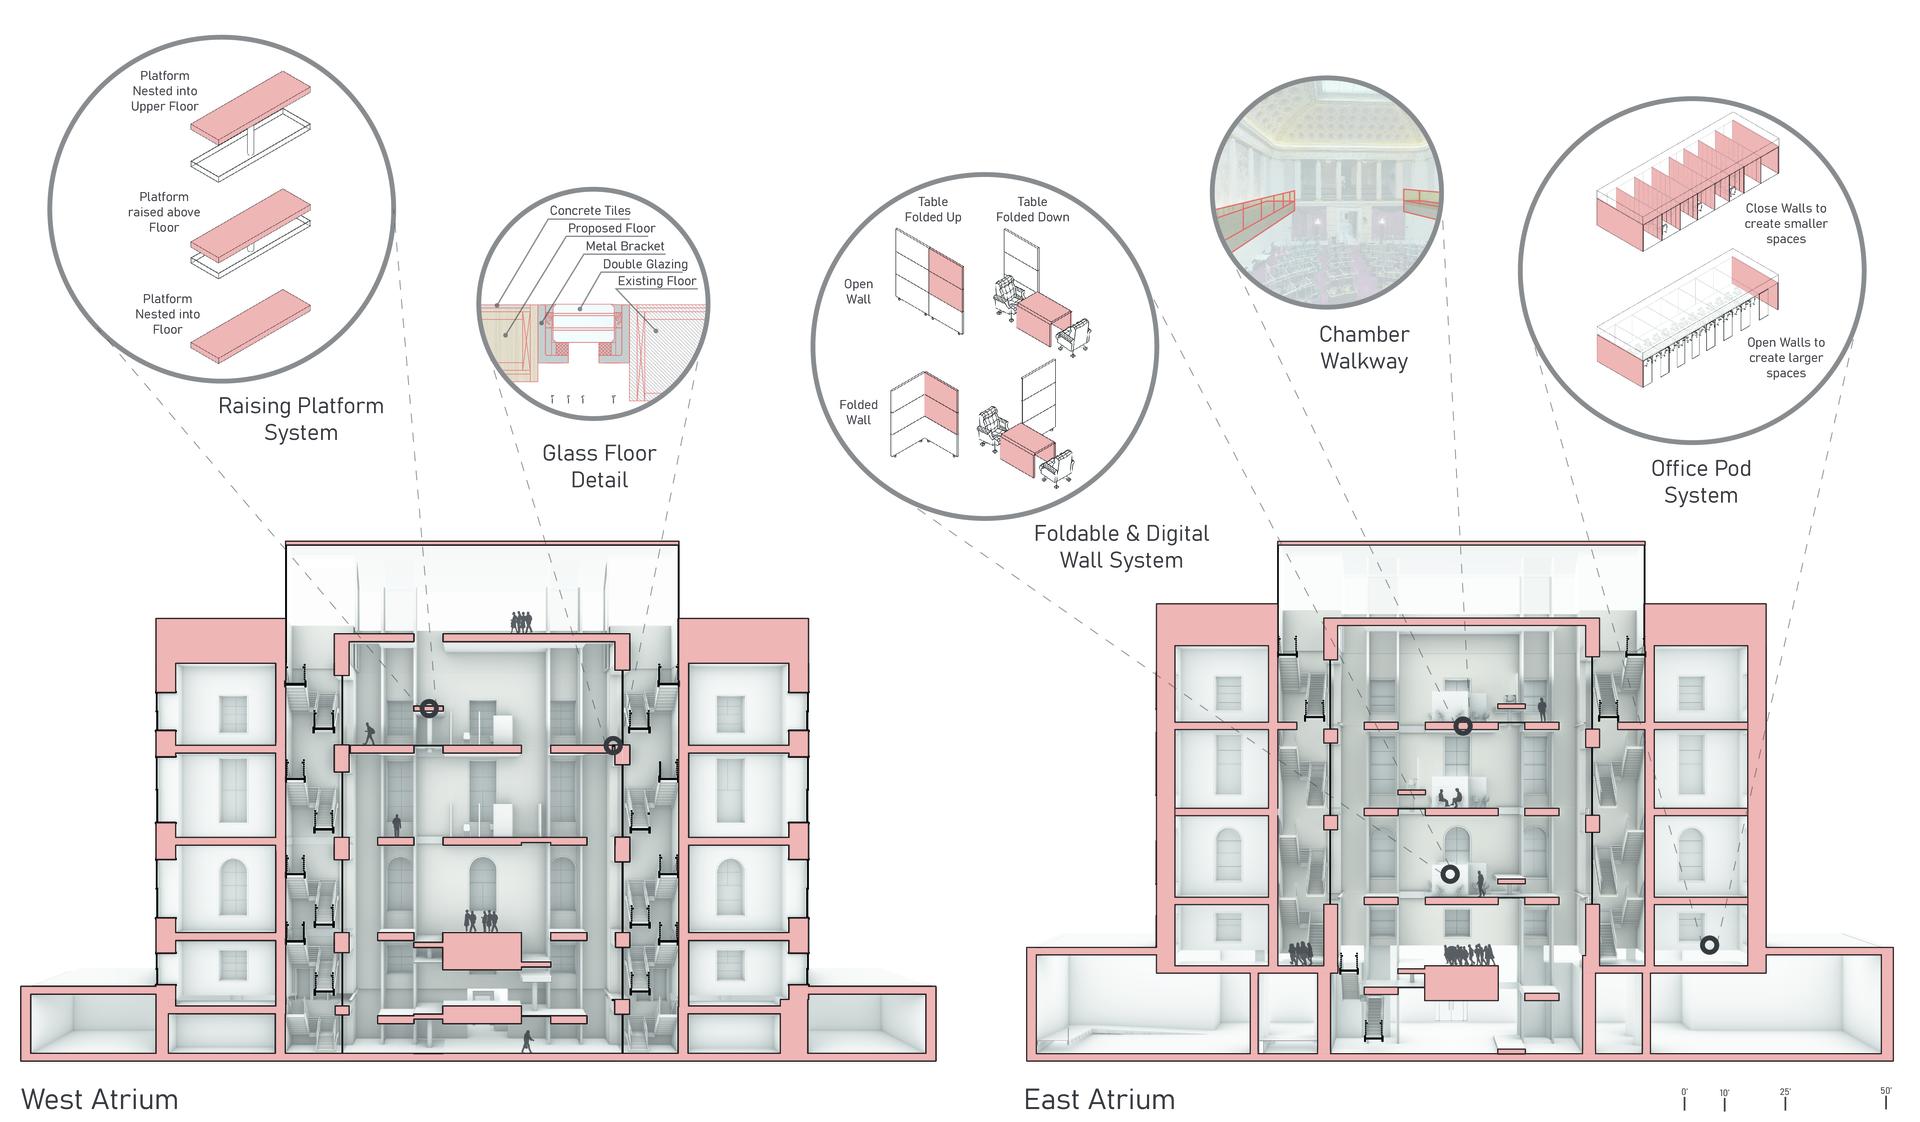 Two section perspectives with callouts that detail two activist atrium spaces, which include spaces like education, exhibition, meeting, and office space. 